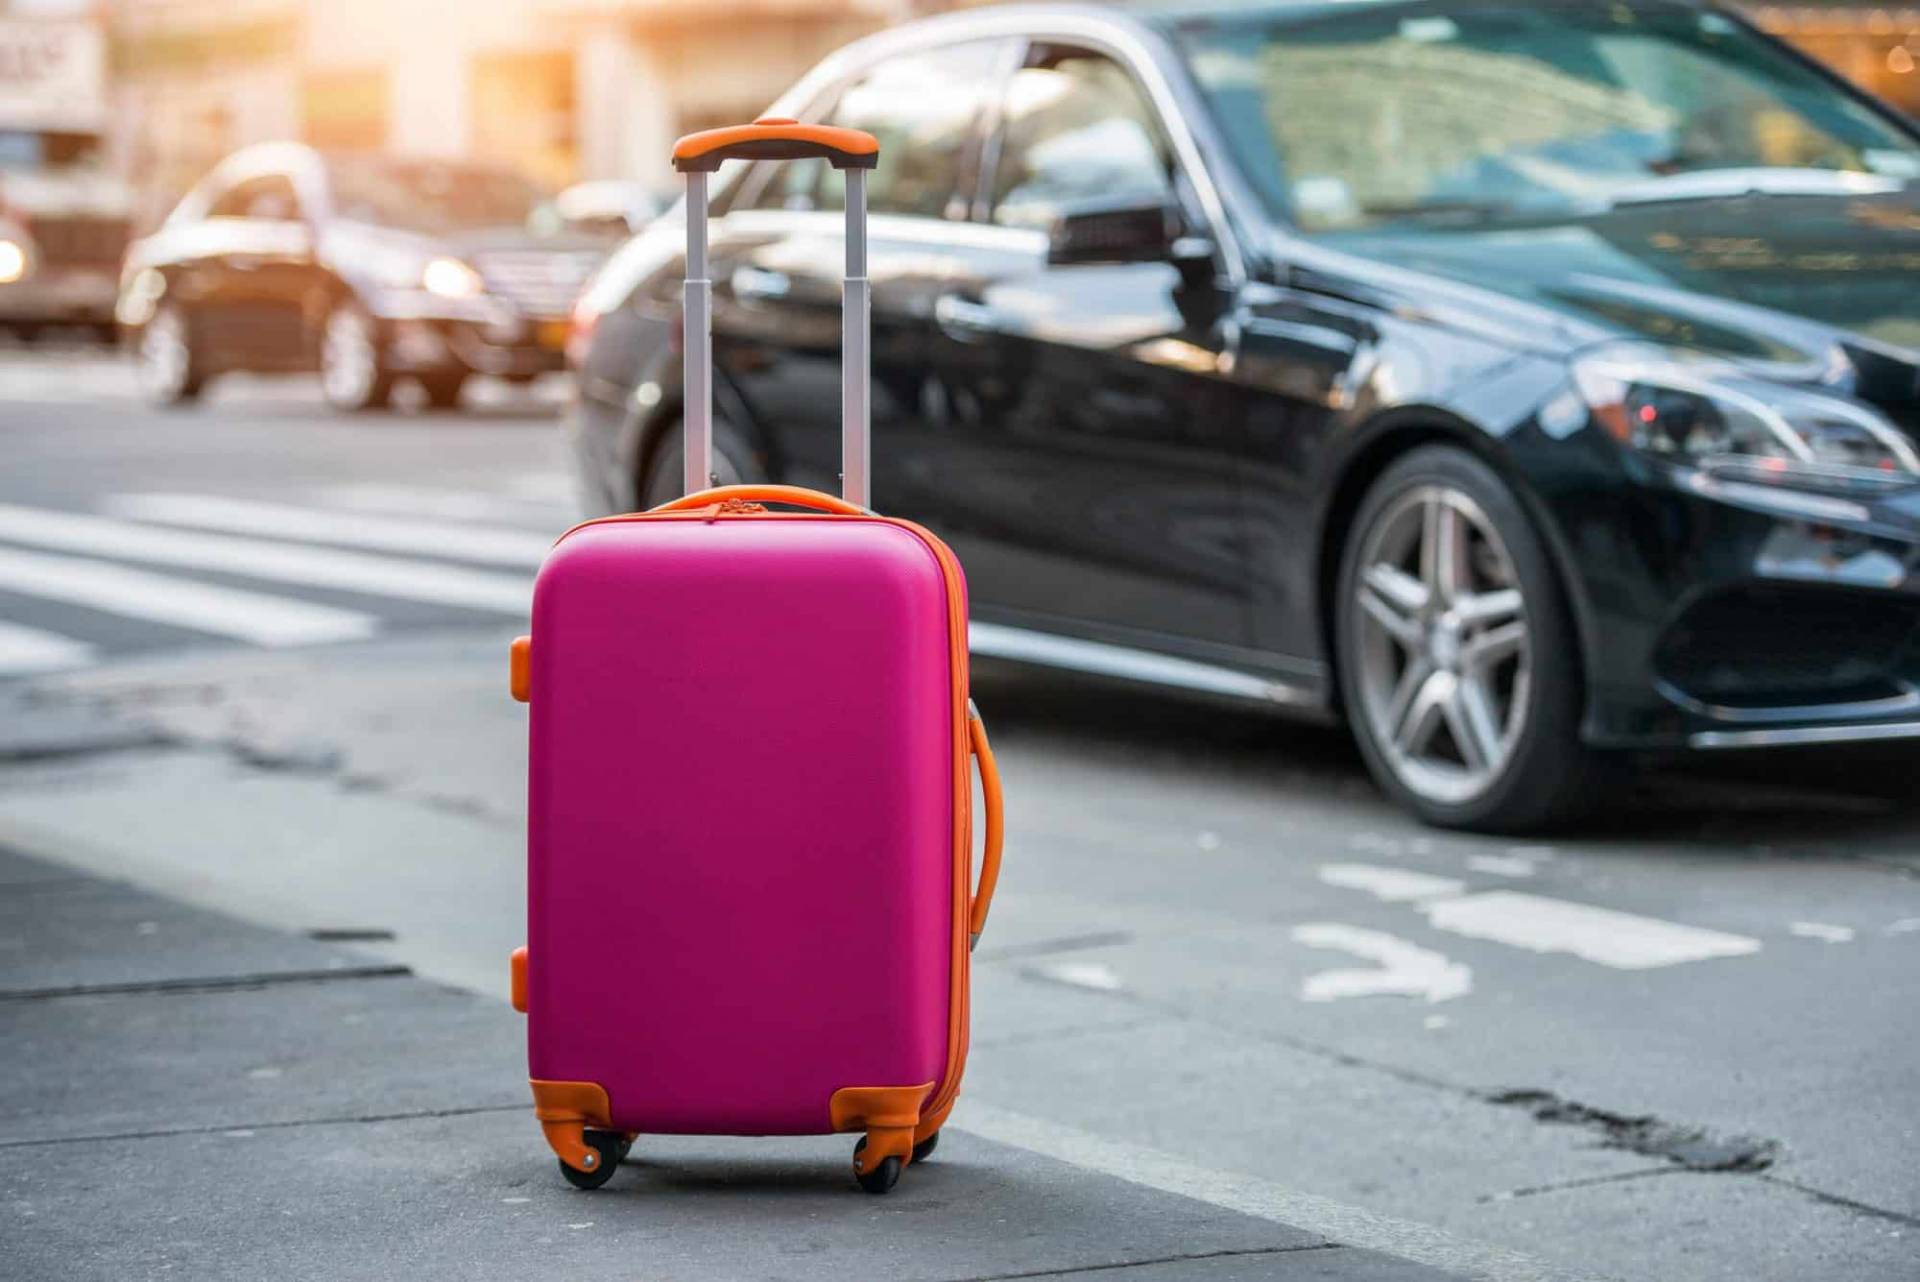 Pink Suitcase next to Black Taxi